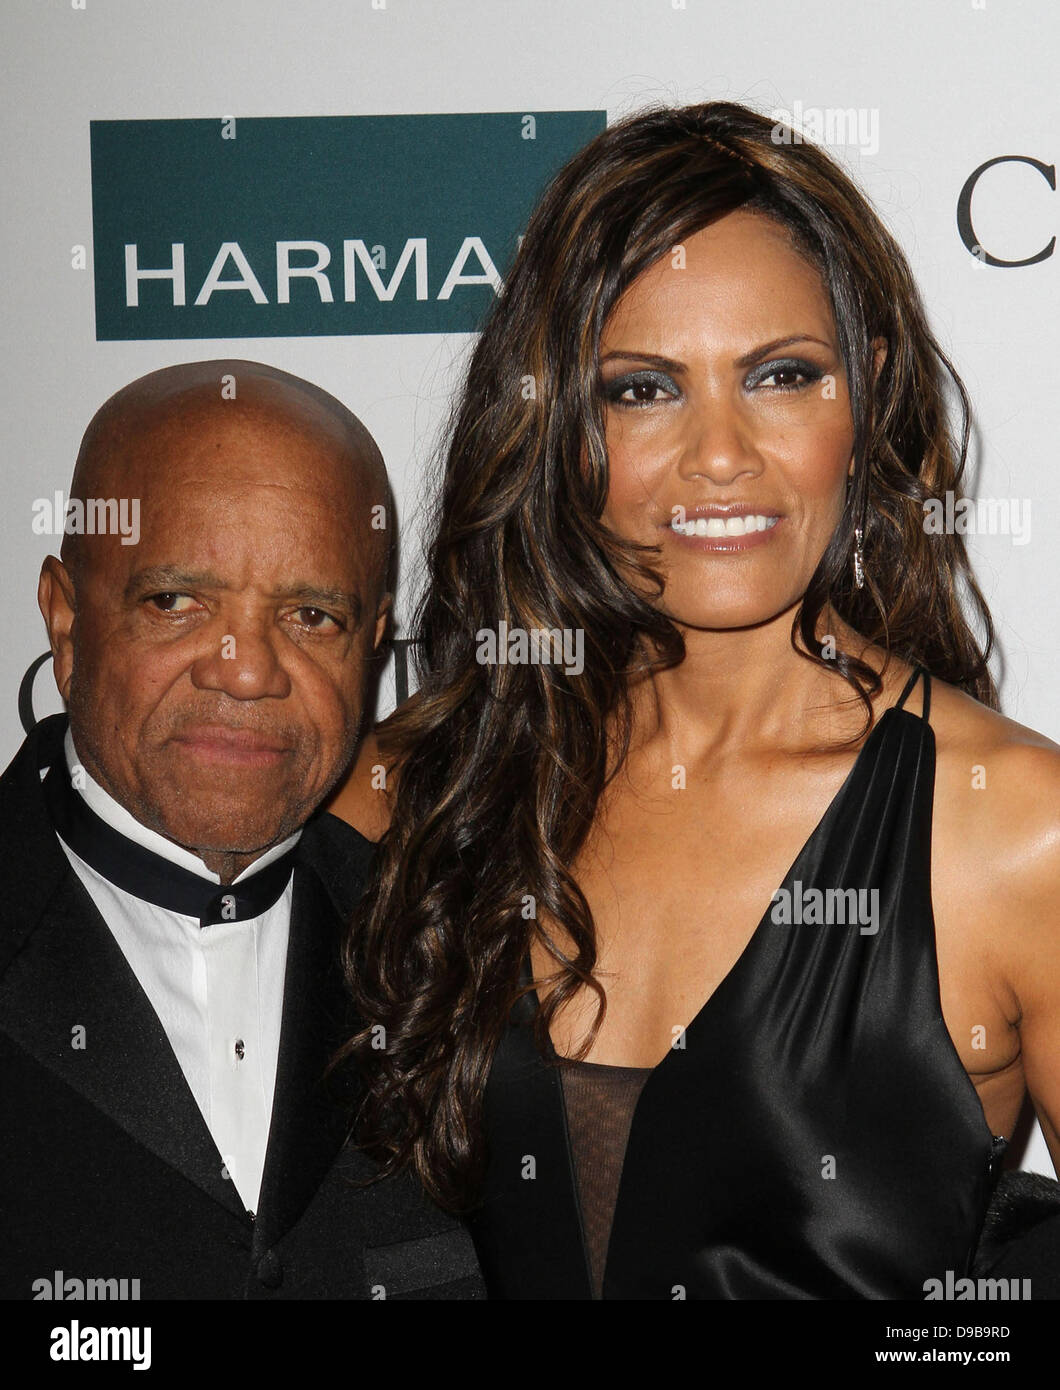 Berry Gordy Jr Clive Davis And The Recording Academy's 2012 Pre-GRAMMY Gala Held at Beverly Hilton Hotel Los Angeles, California - 11.02.12 Stock Photo